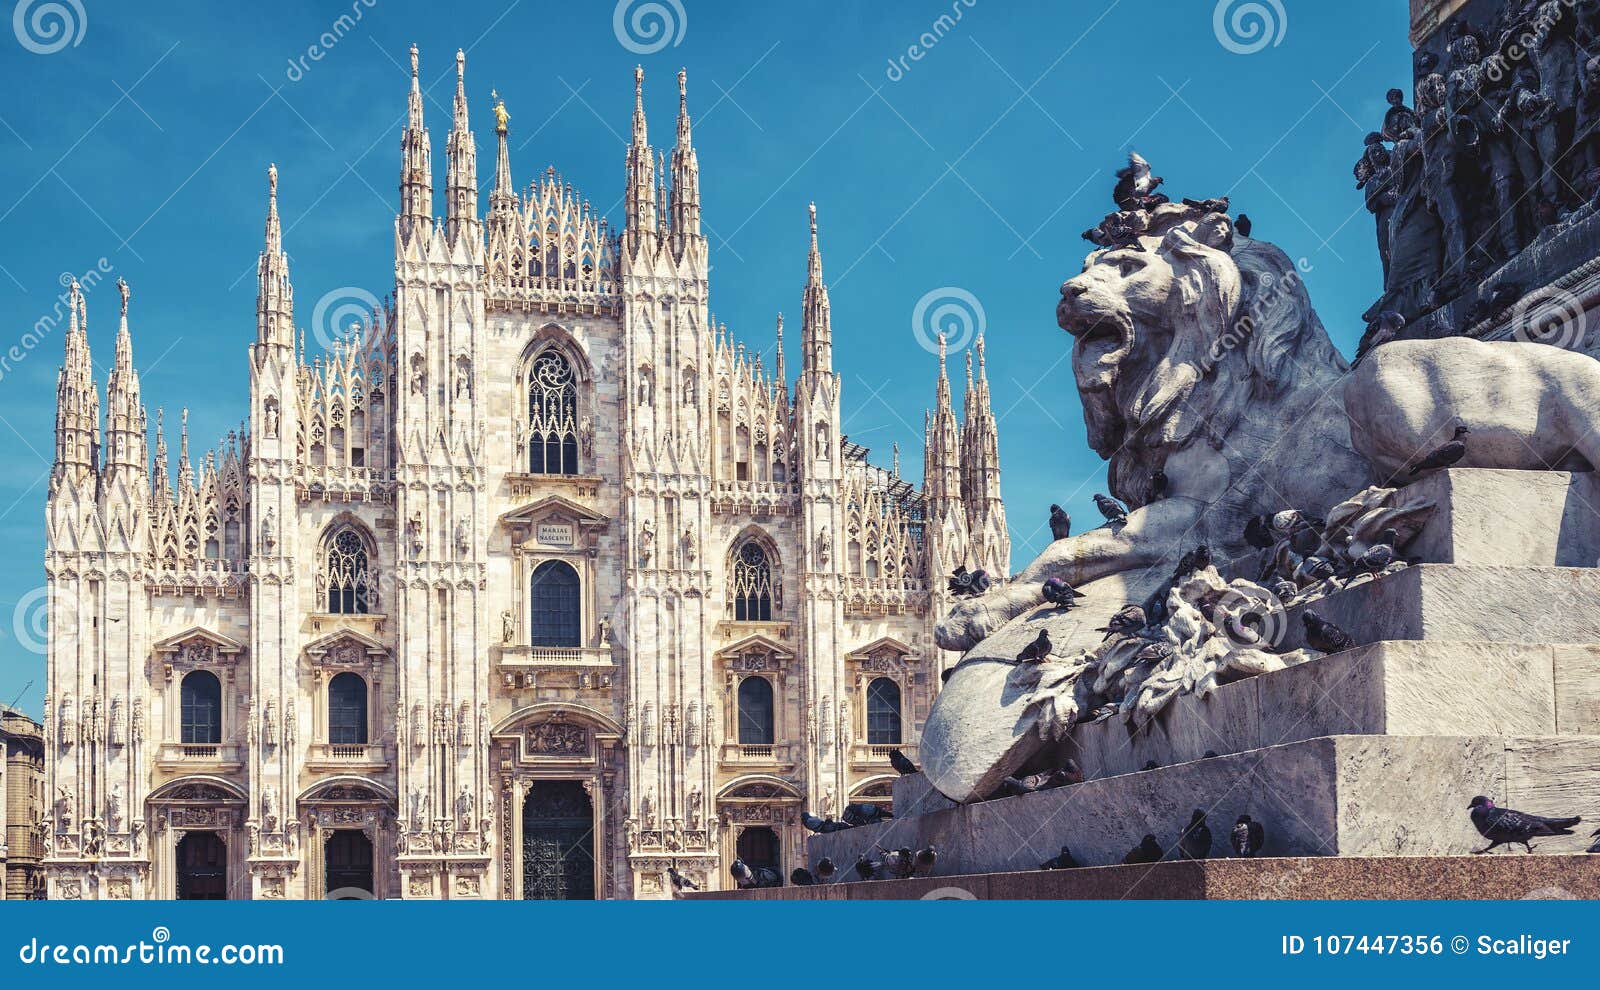 lion and milan cathedral in milan, italy